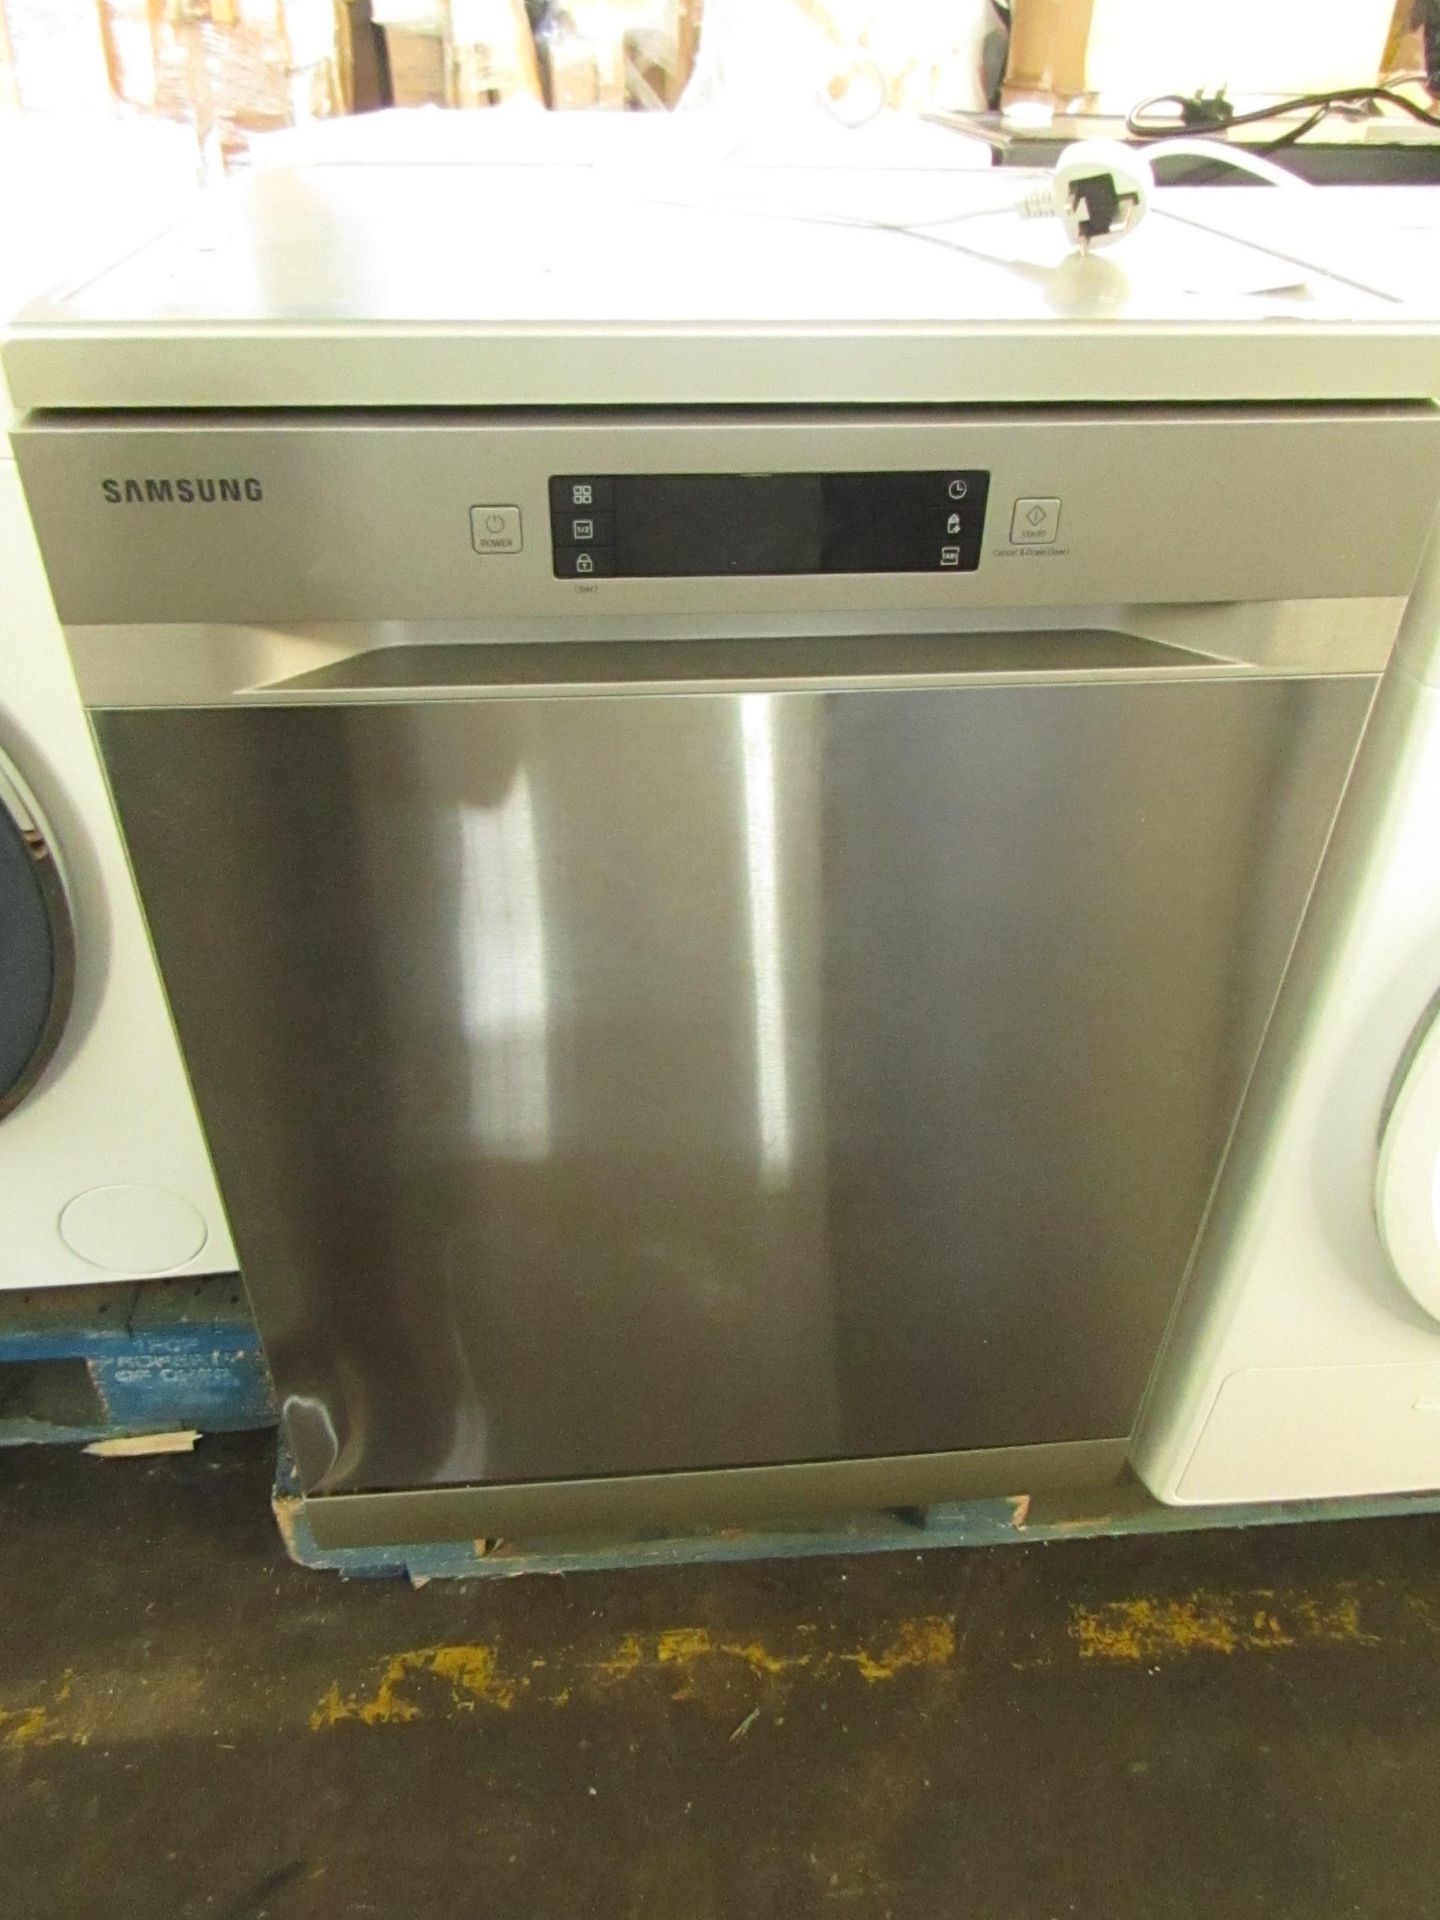 Samsung DW60M5050FS freestanding dishwasher, powers on but we have not connected it to water or